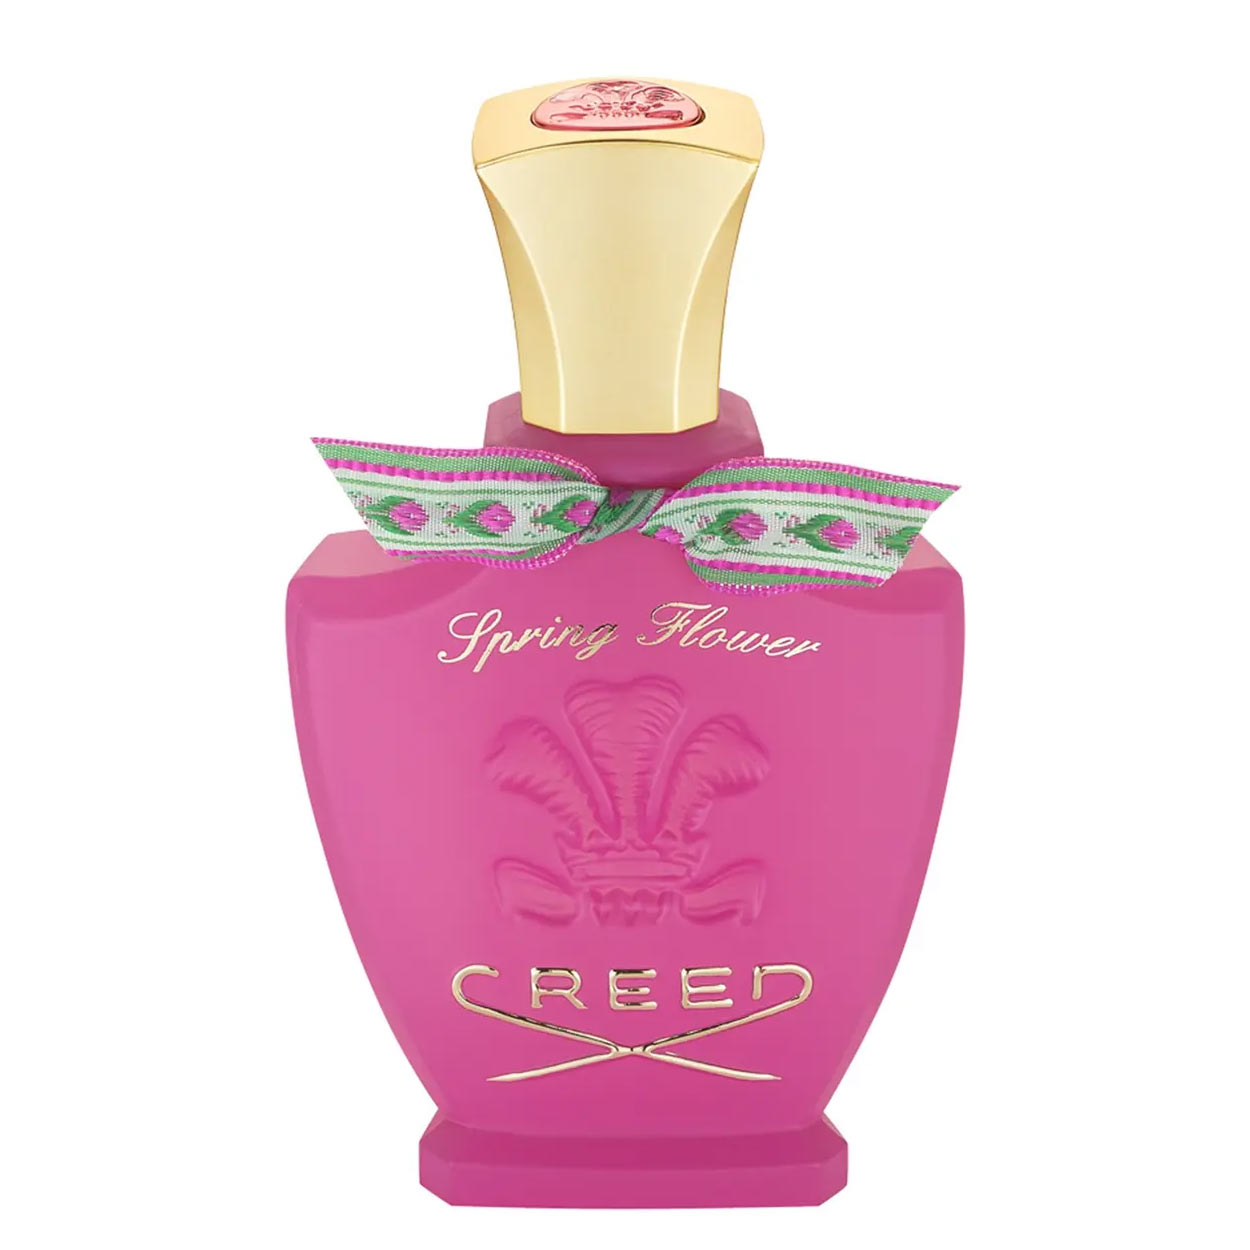 Creed-Spring-Flower-Creed